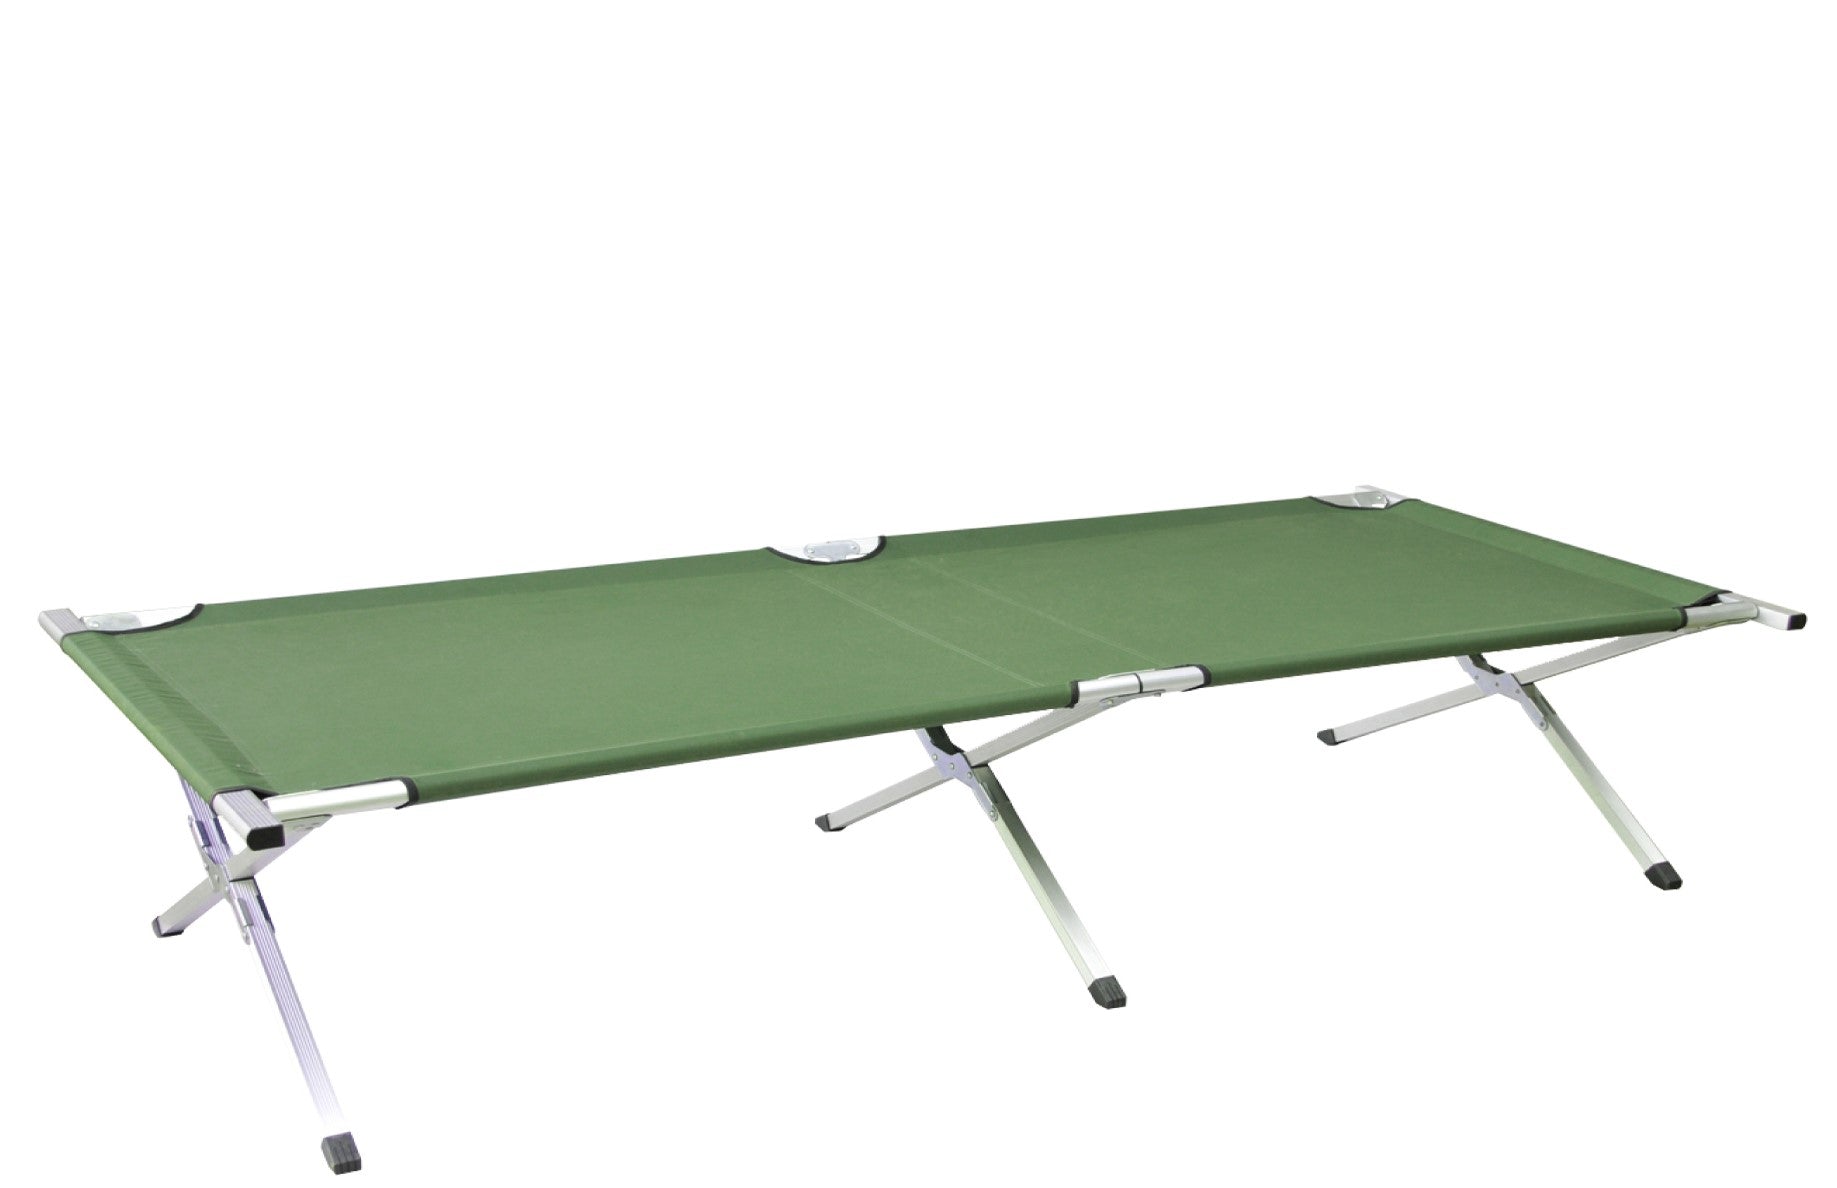 MediTac Camping Military Outdoors Bed Cot - Heavy Duty, Durable with C